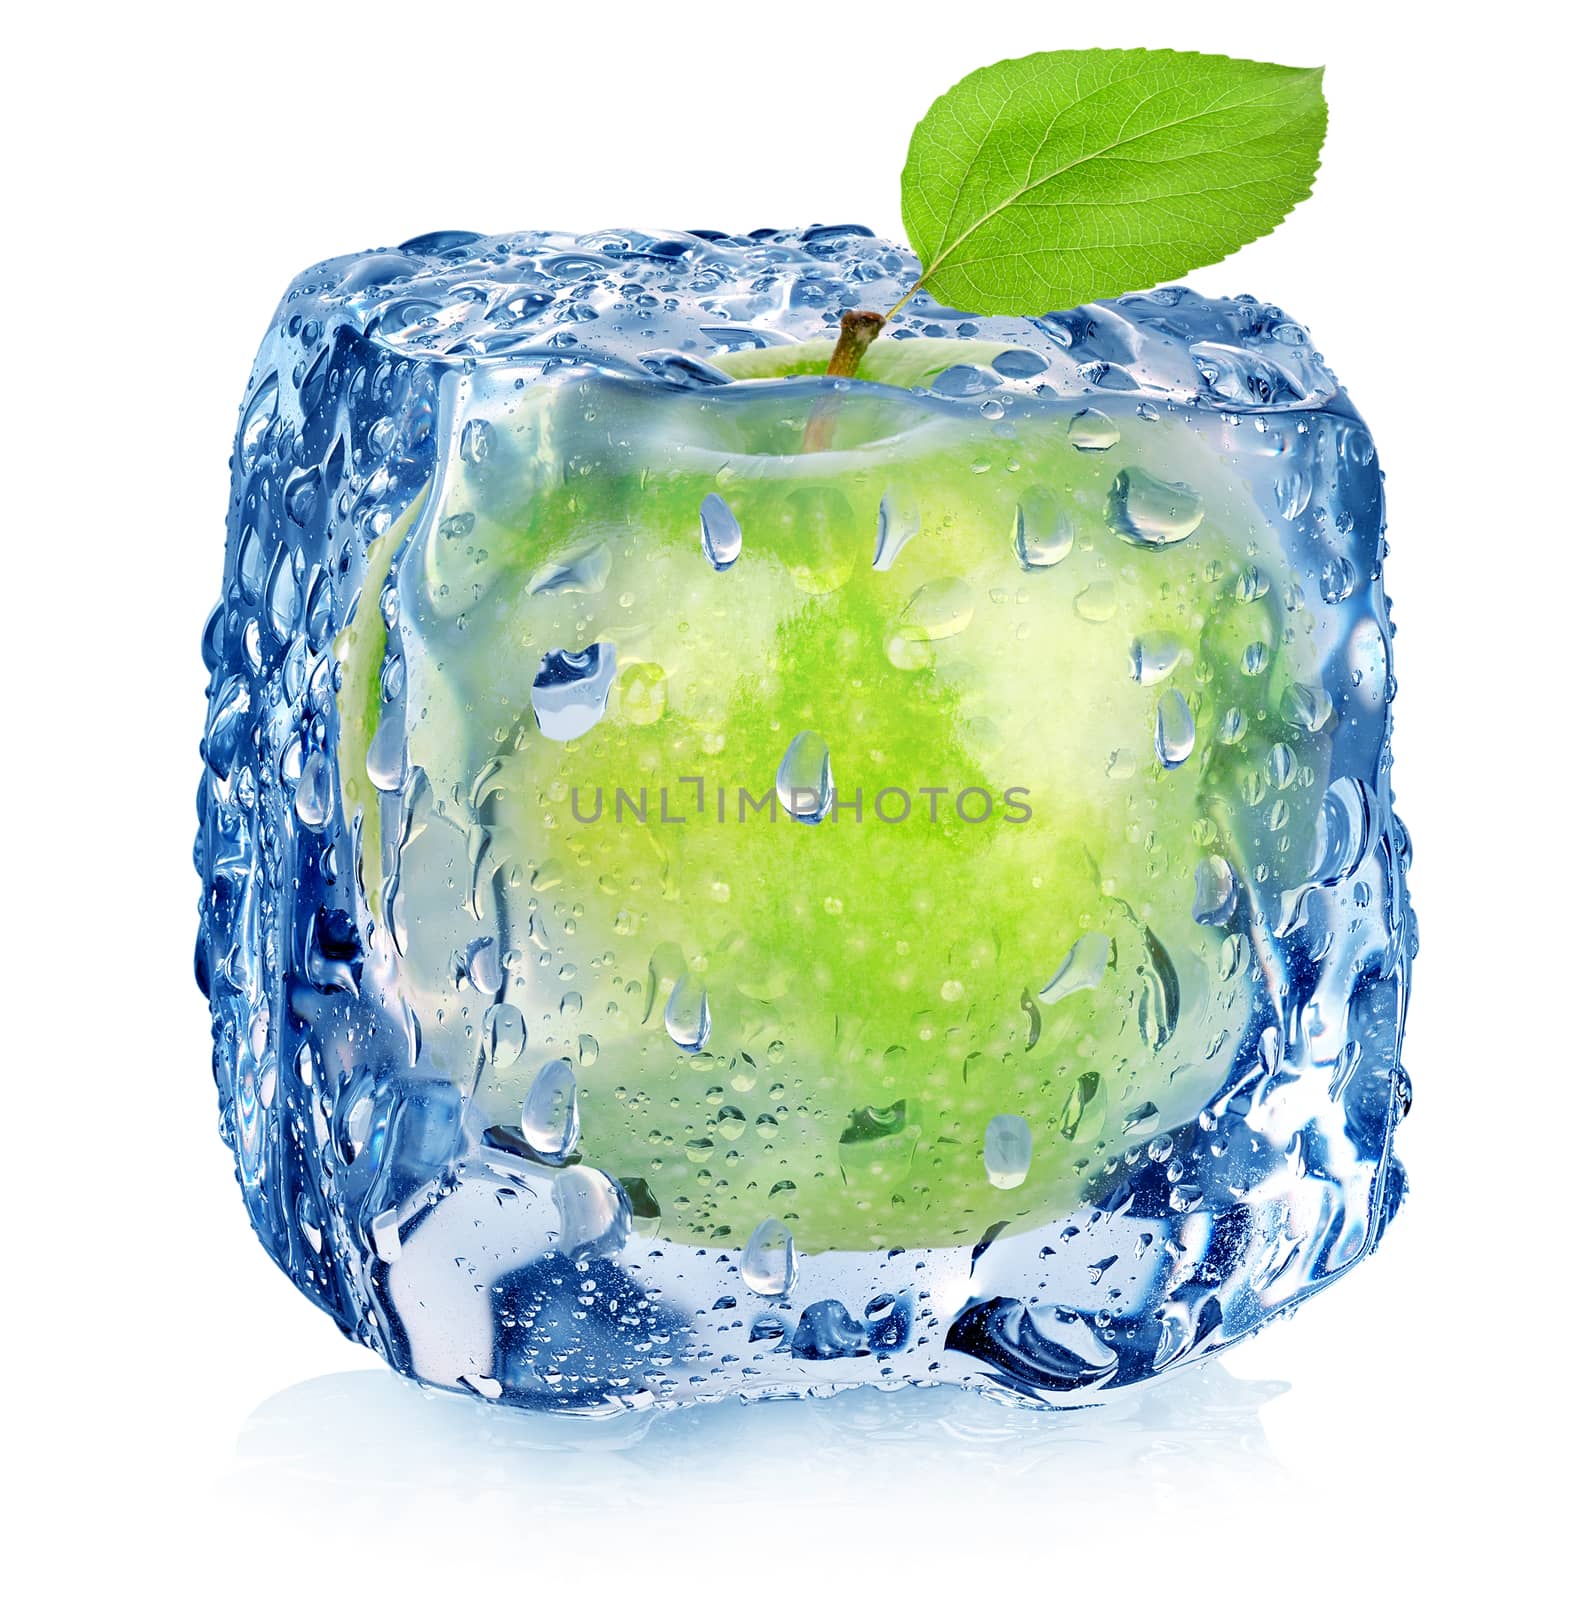 Frozen green apple by Givaga